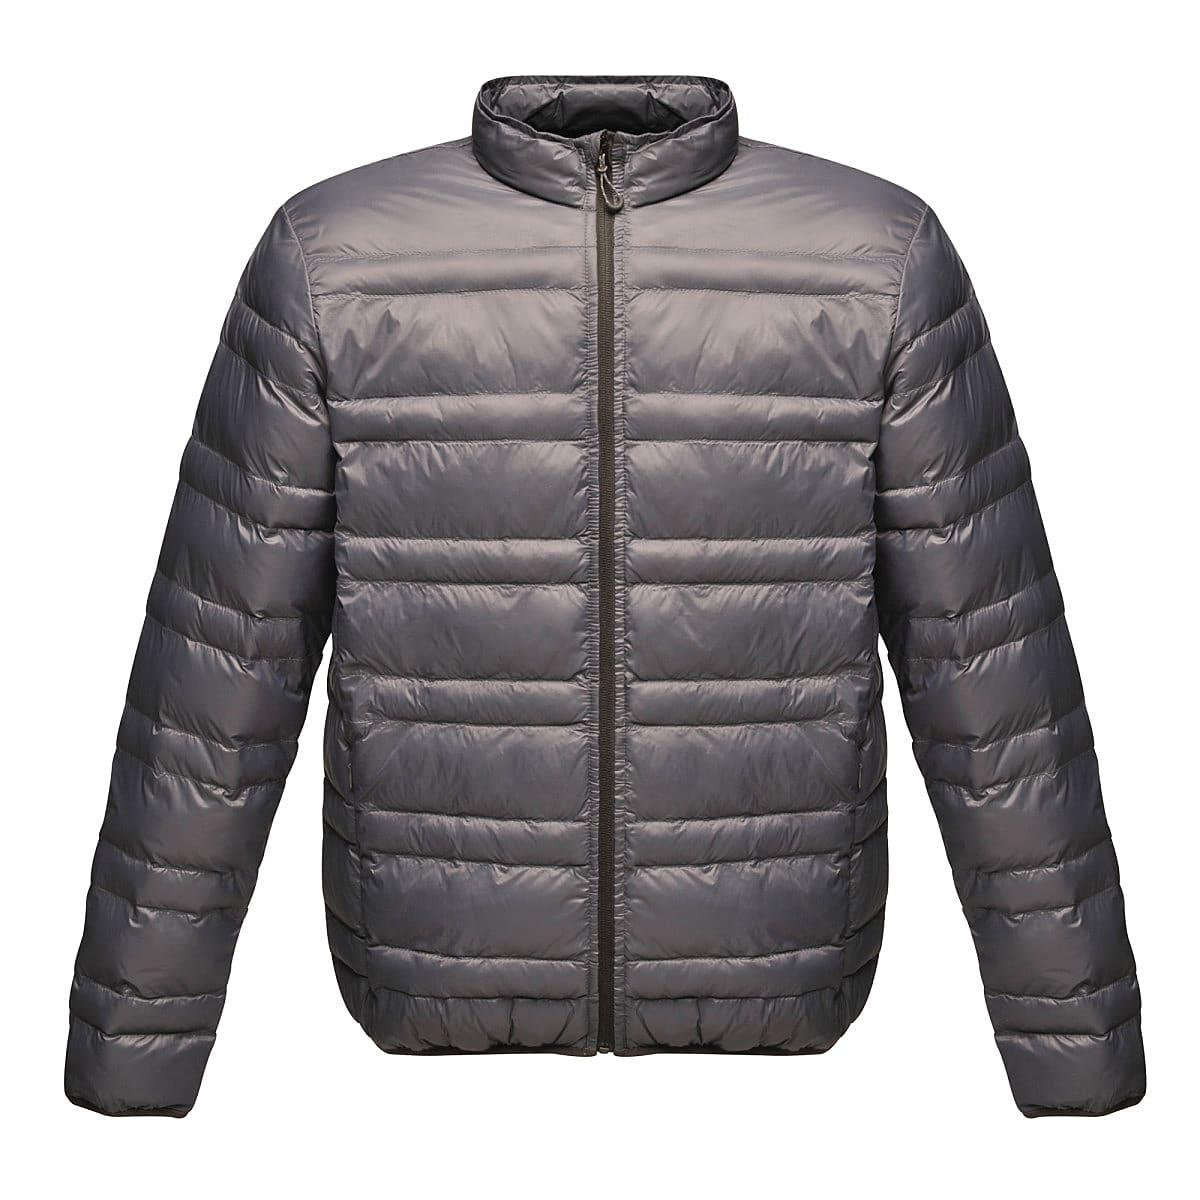 Regatta Fire Down-Touch Padded Jacket in Seal Grey / Black (Product Code: TRA496)